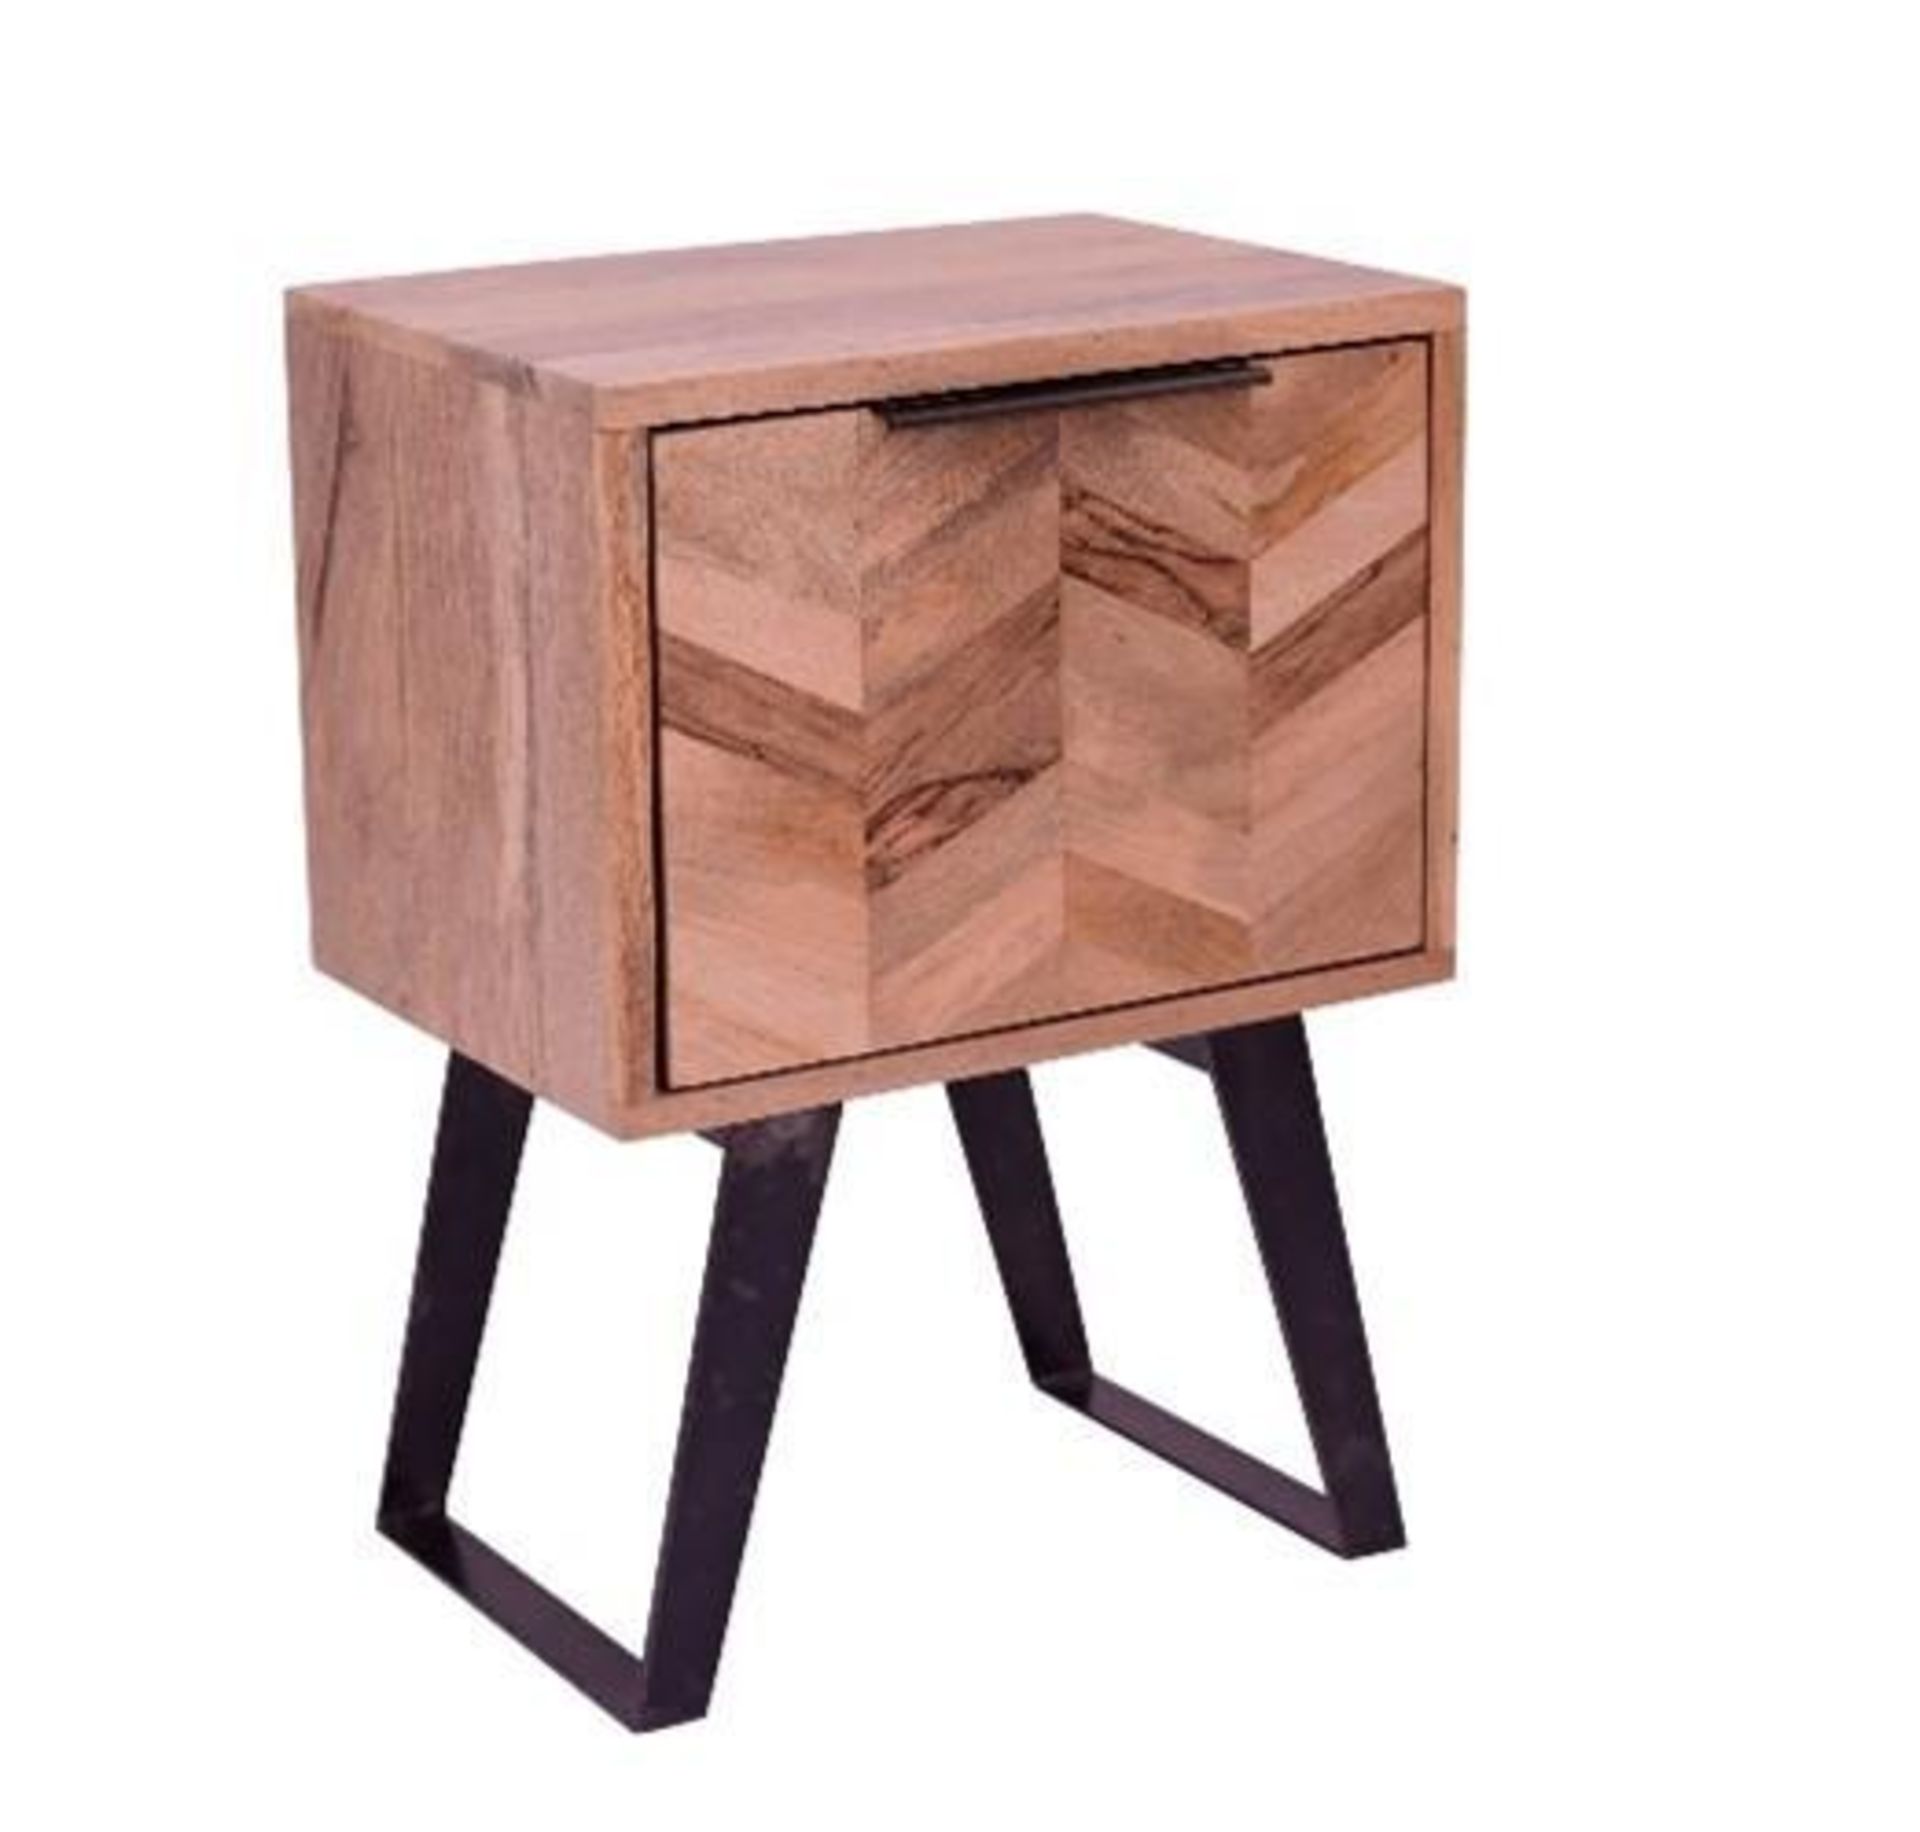 *BRAND NEW* IFD Agra solid mango wood side table with large drawer. RRP: £215